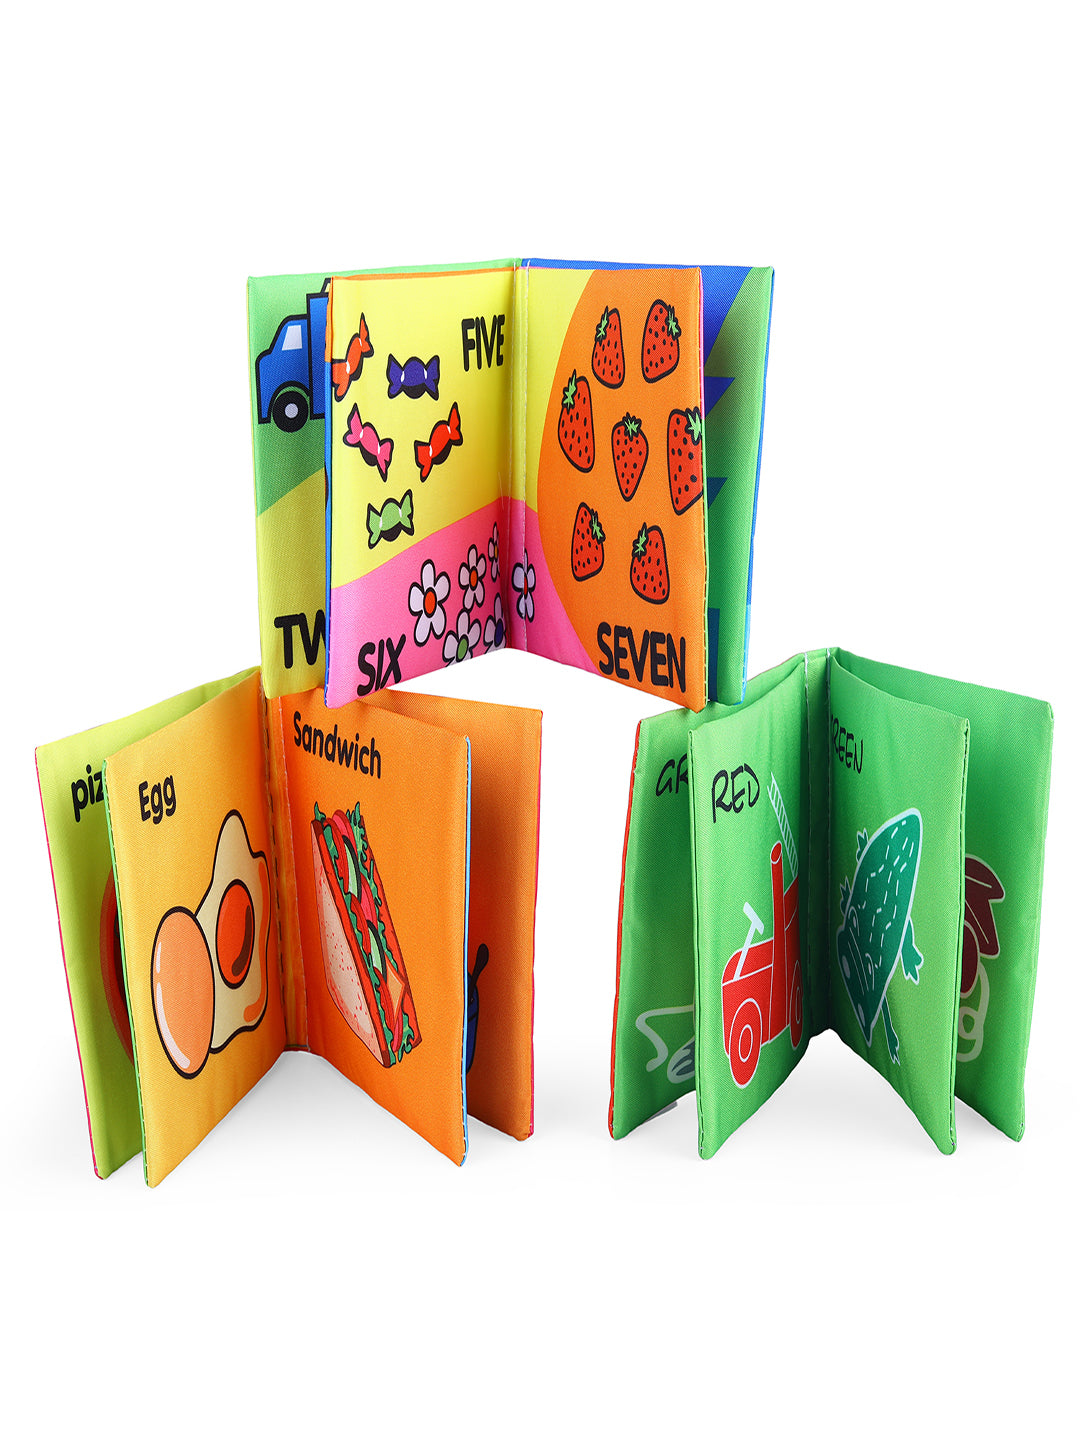 Baby Moo Numbers Animals Shapes Colours Food Occupations Baby Educational Cloth Book with Sound Paper Set of 6 - Multicolour